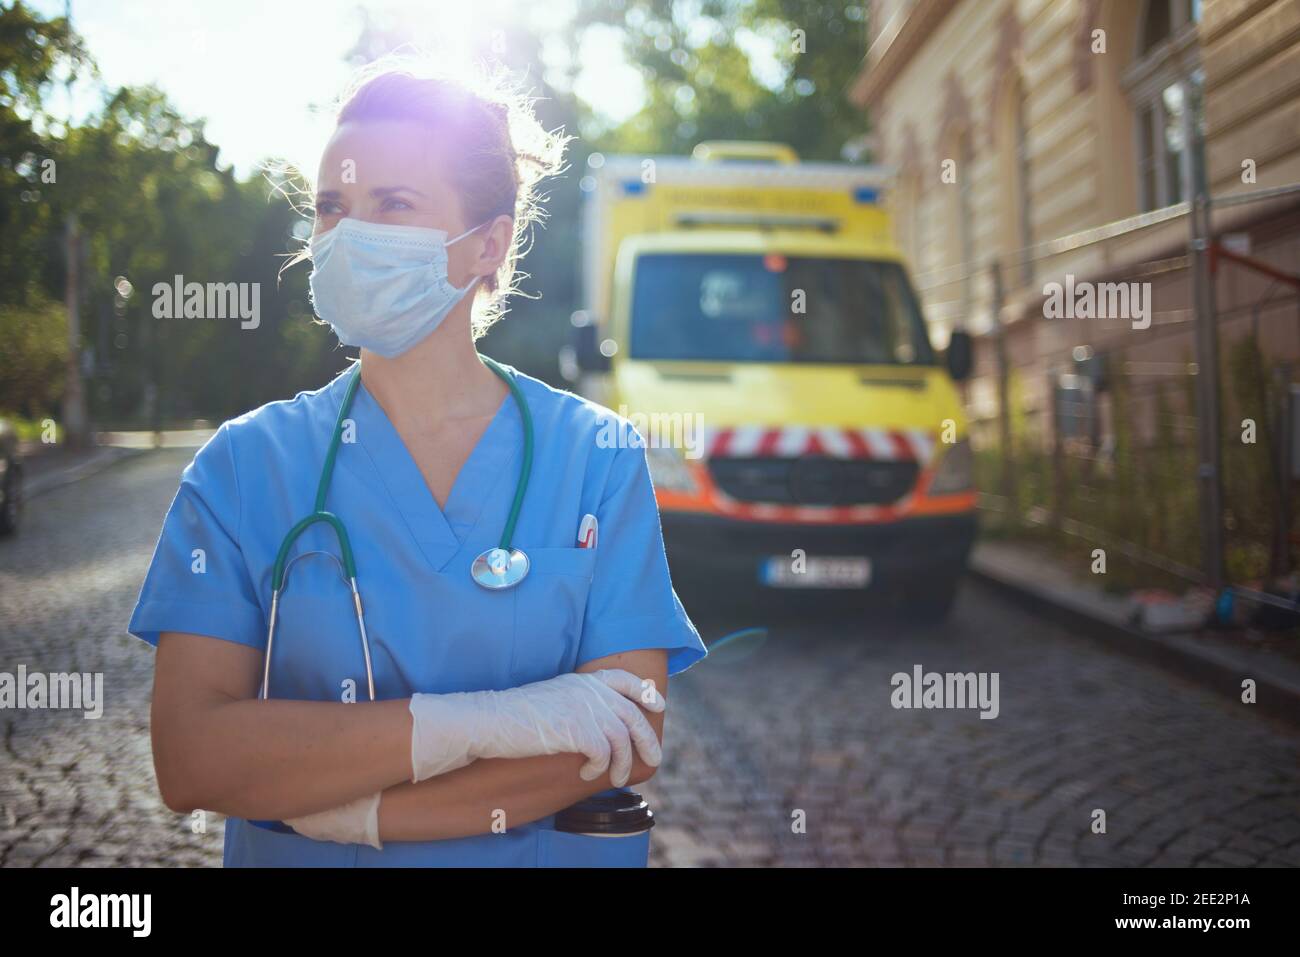 covid-19 pandemic. modern medical doctor woman in uniform with stethoscope and medical mask looking into the distance outdoors near ambulance. Stock Photo